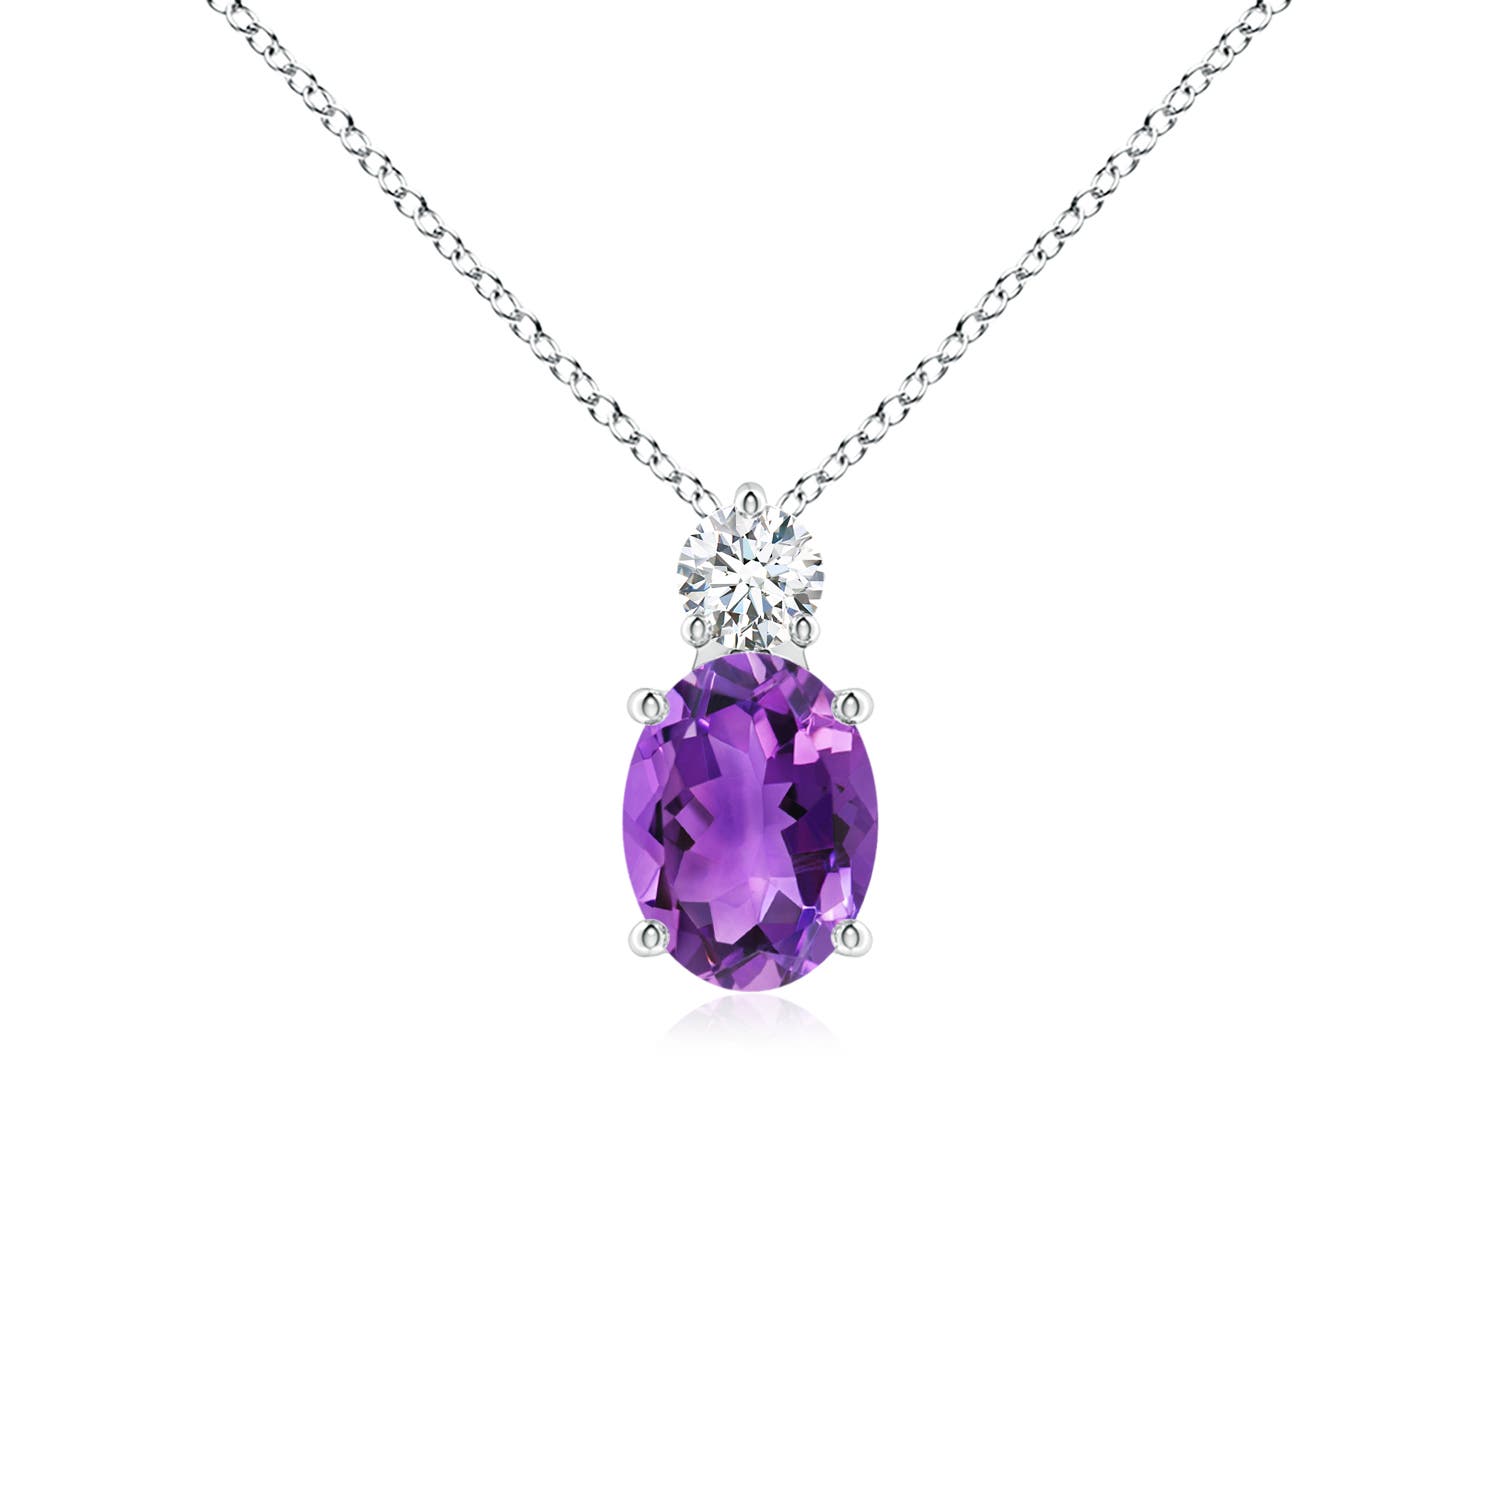 AAA - Amethyst / 1.31 CT / 14 KT White Gold